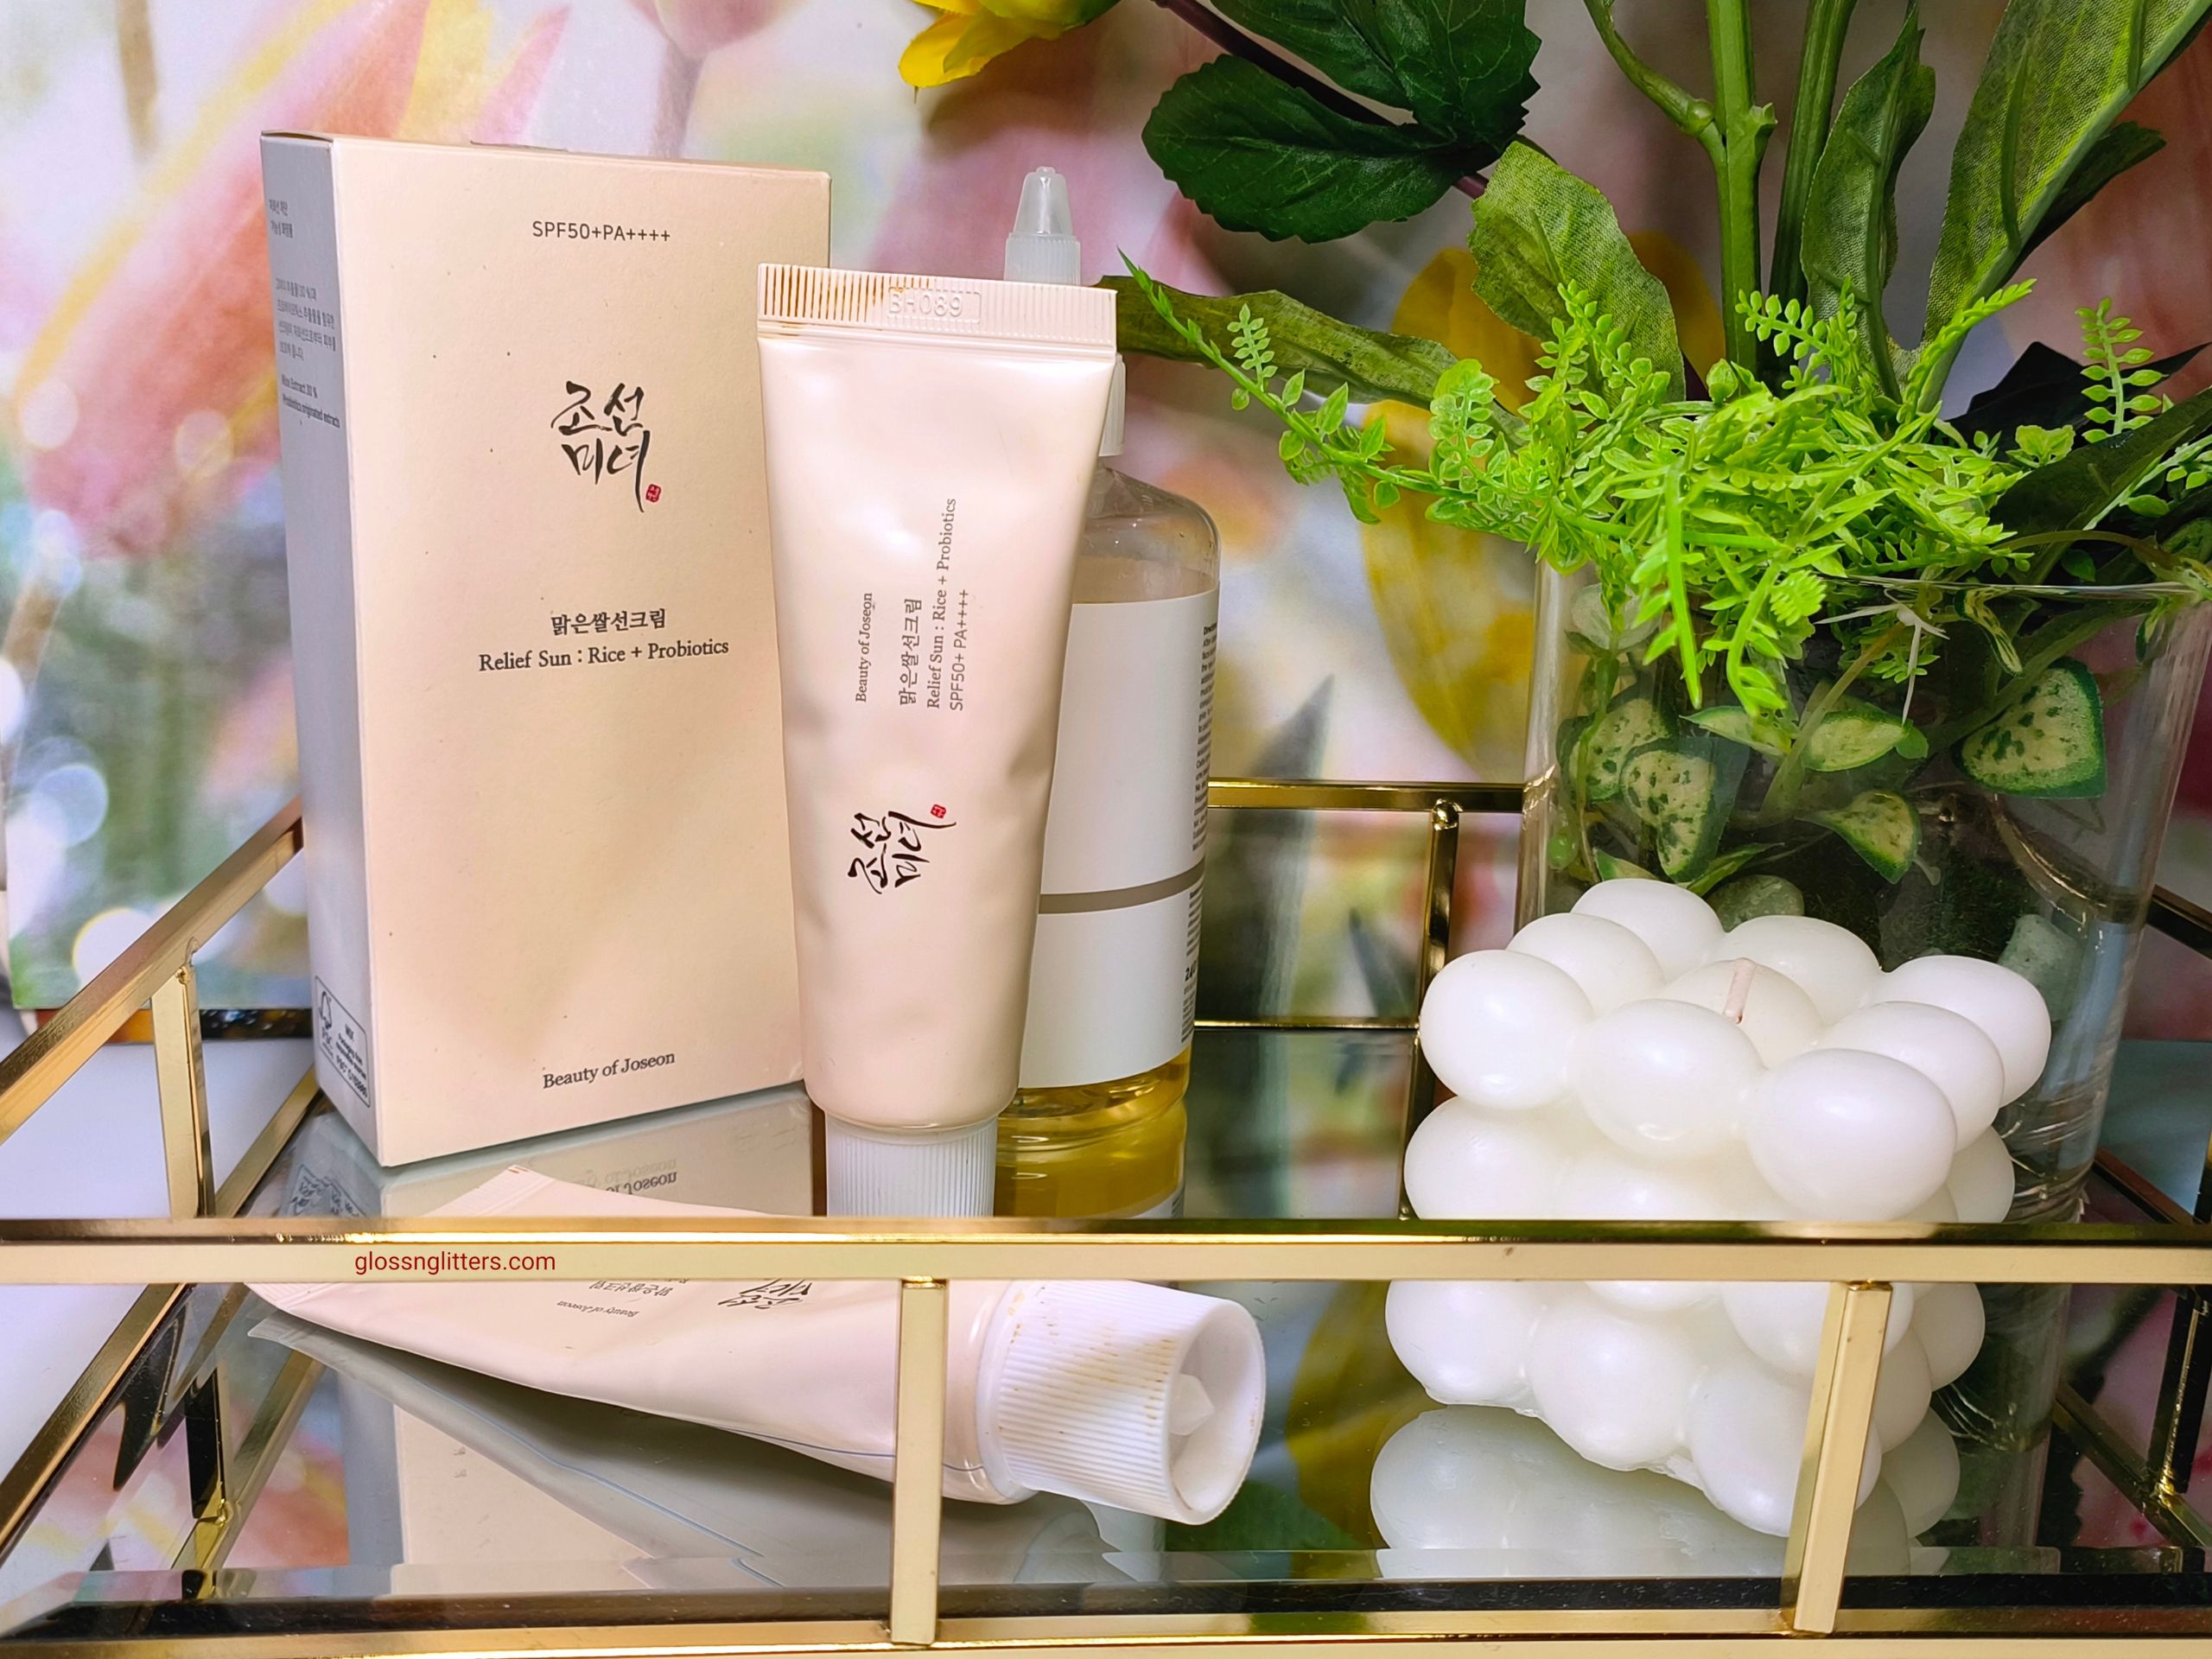 Beauty Of Joseon Relief Sun Sunscreen Review : Is It Worth The Hype? - Glossnglitters